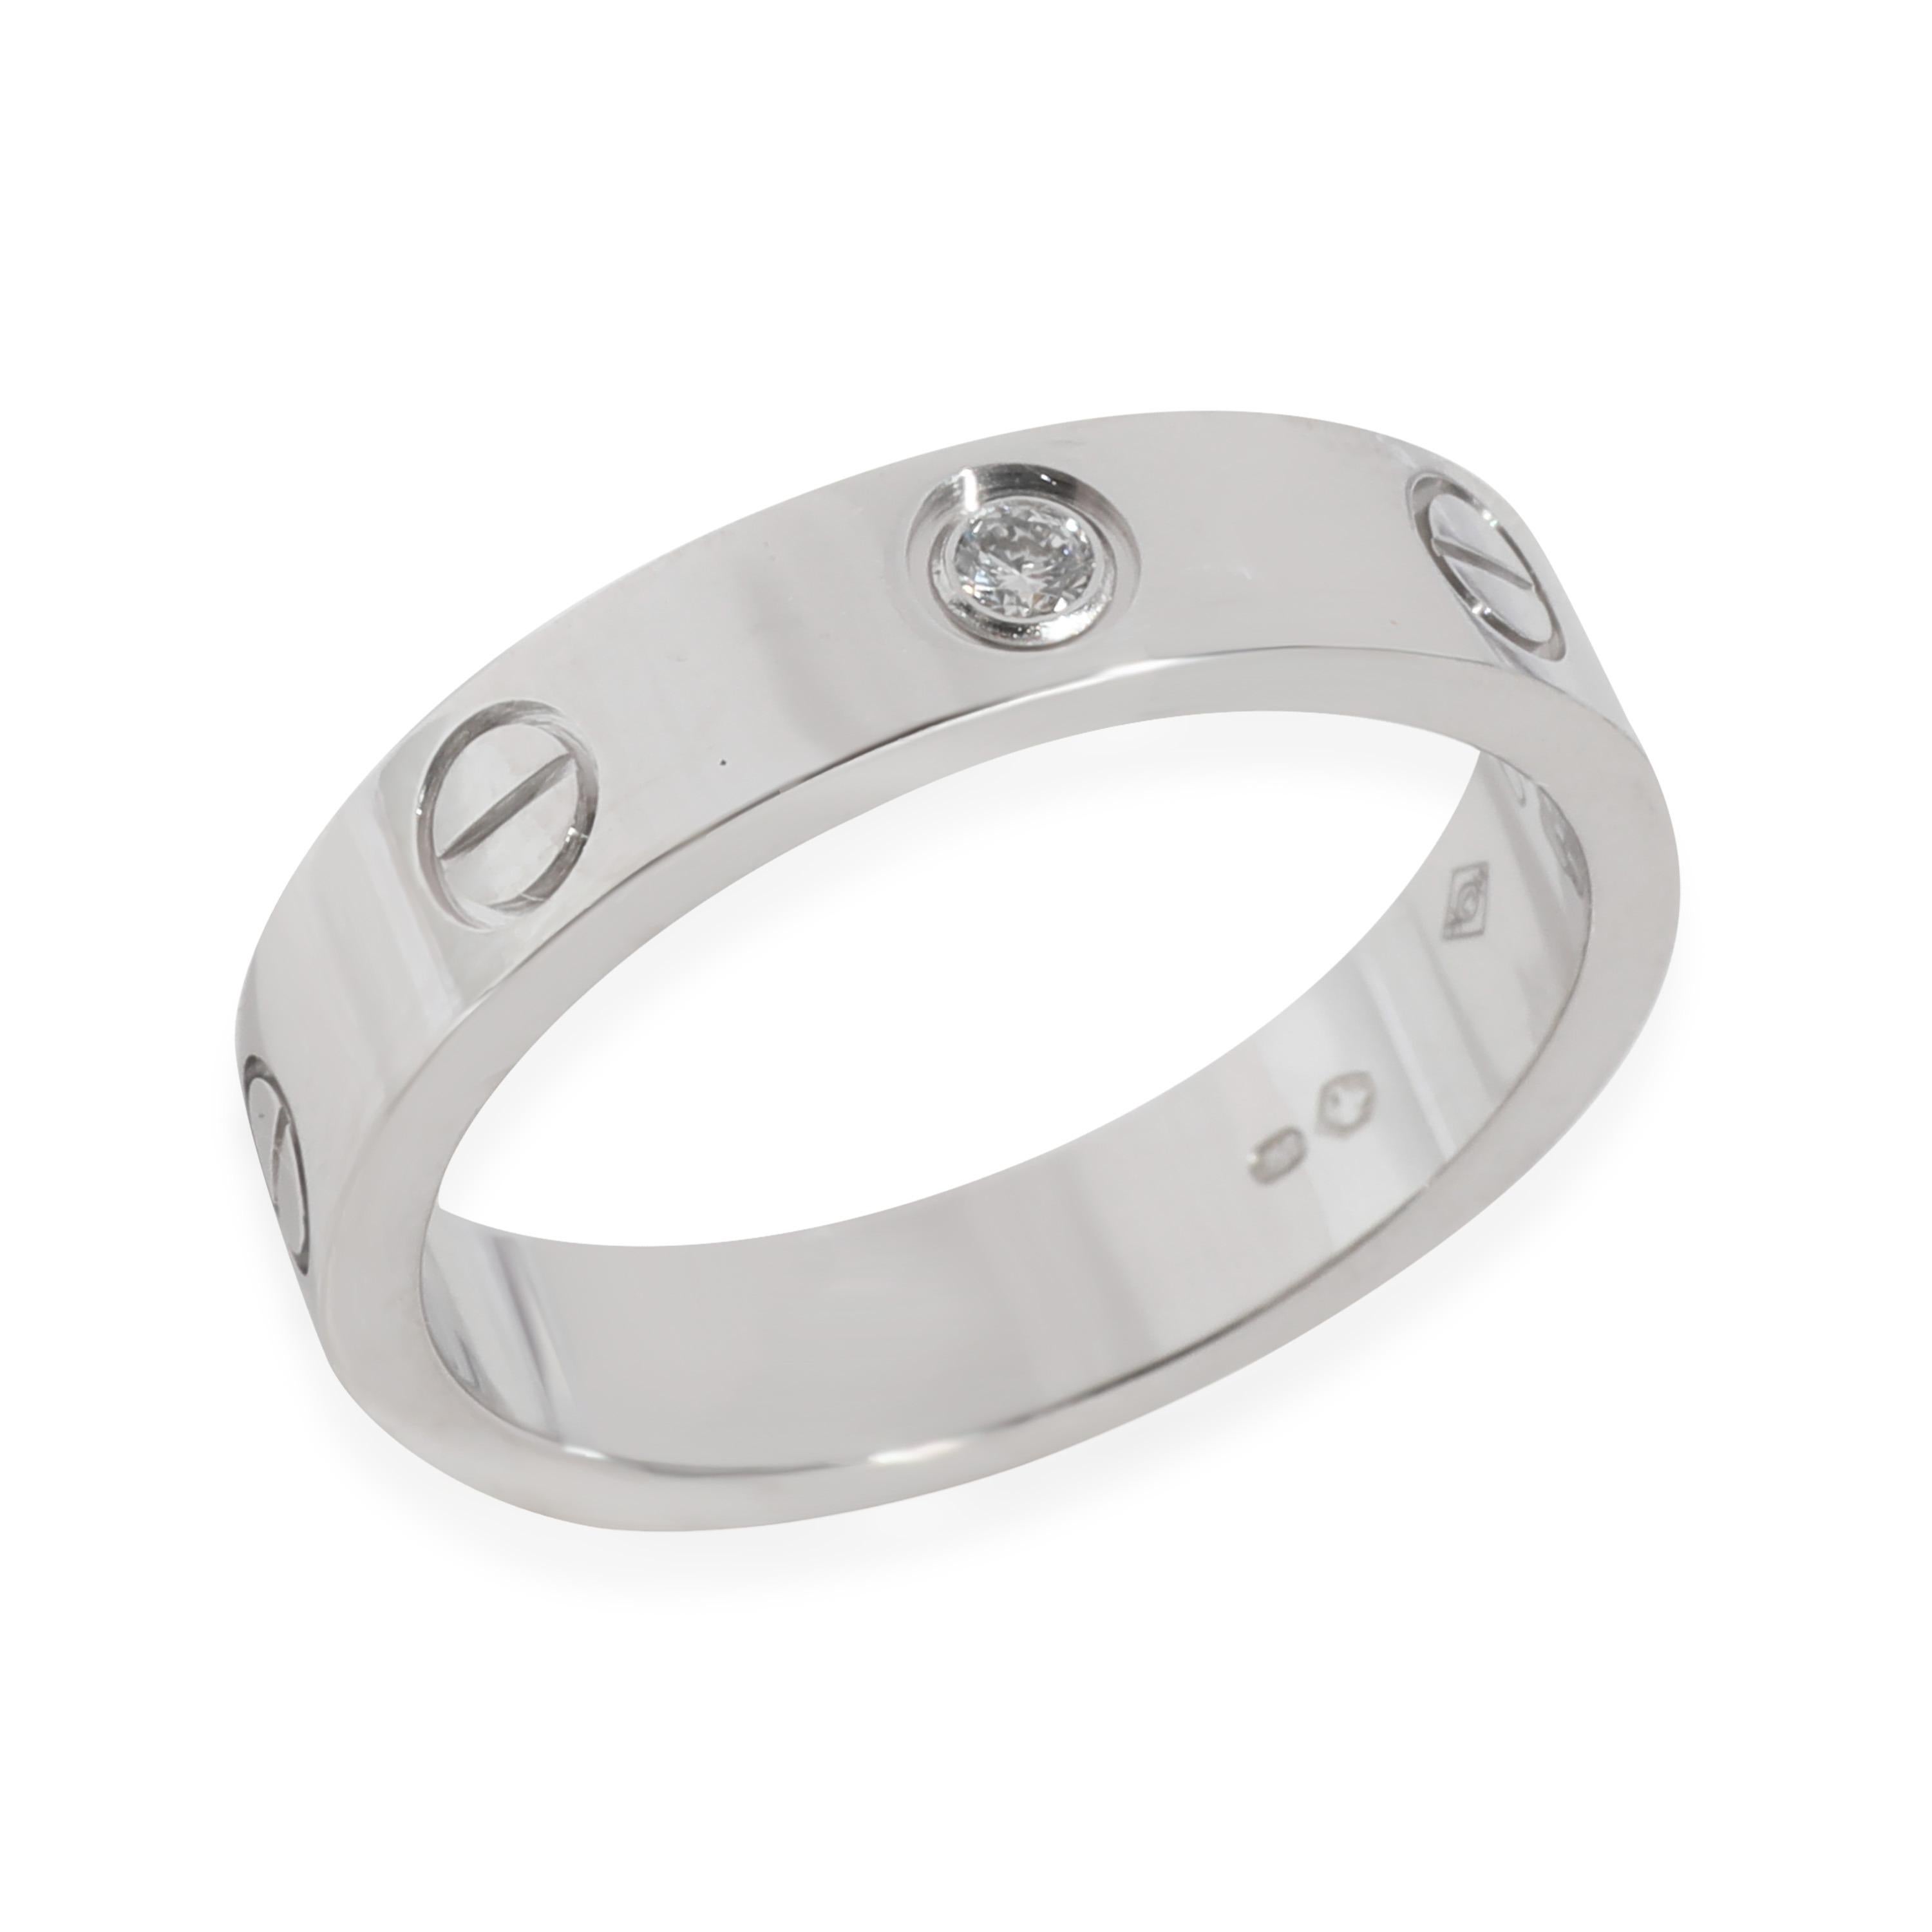 Cartier Love Diamond Ring in 18k White Gold 0.02 CTW

PRIMARY DETAILS
SKU: 128965
Listing Title: Cartier Love Diamond Ring in 18k White Gold 0.02 CTW
Condition Description: Cartier's Love collection is the epitome of iconic, from the recognizable